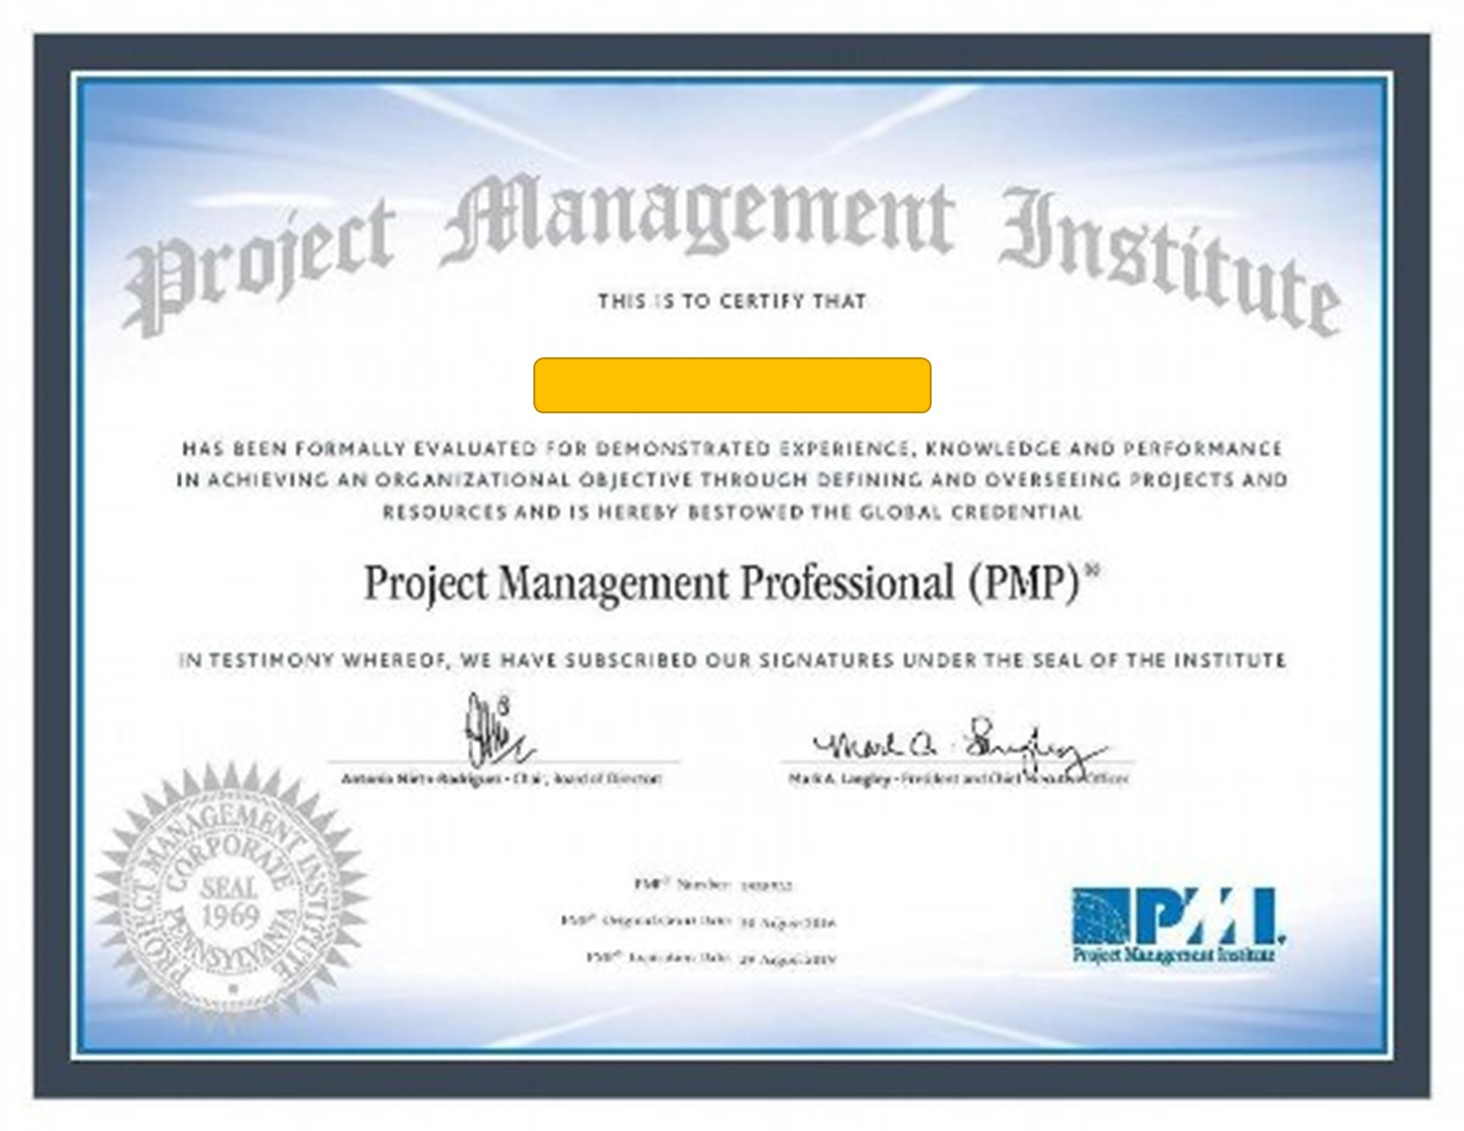 The PMP Certificate from 2016